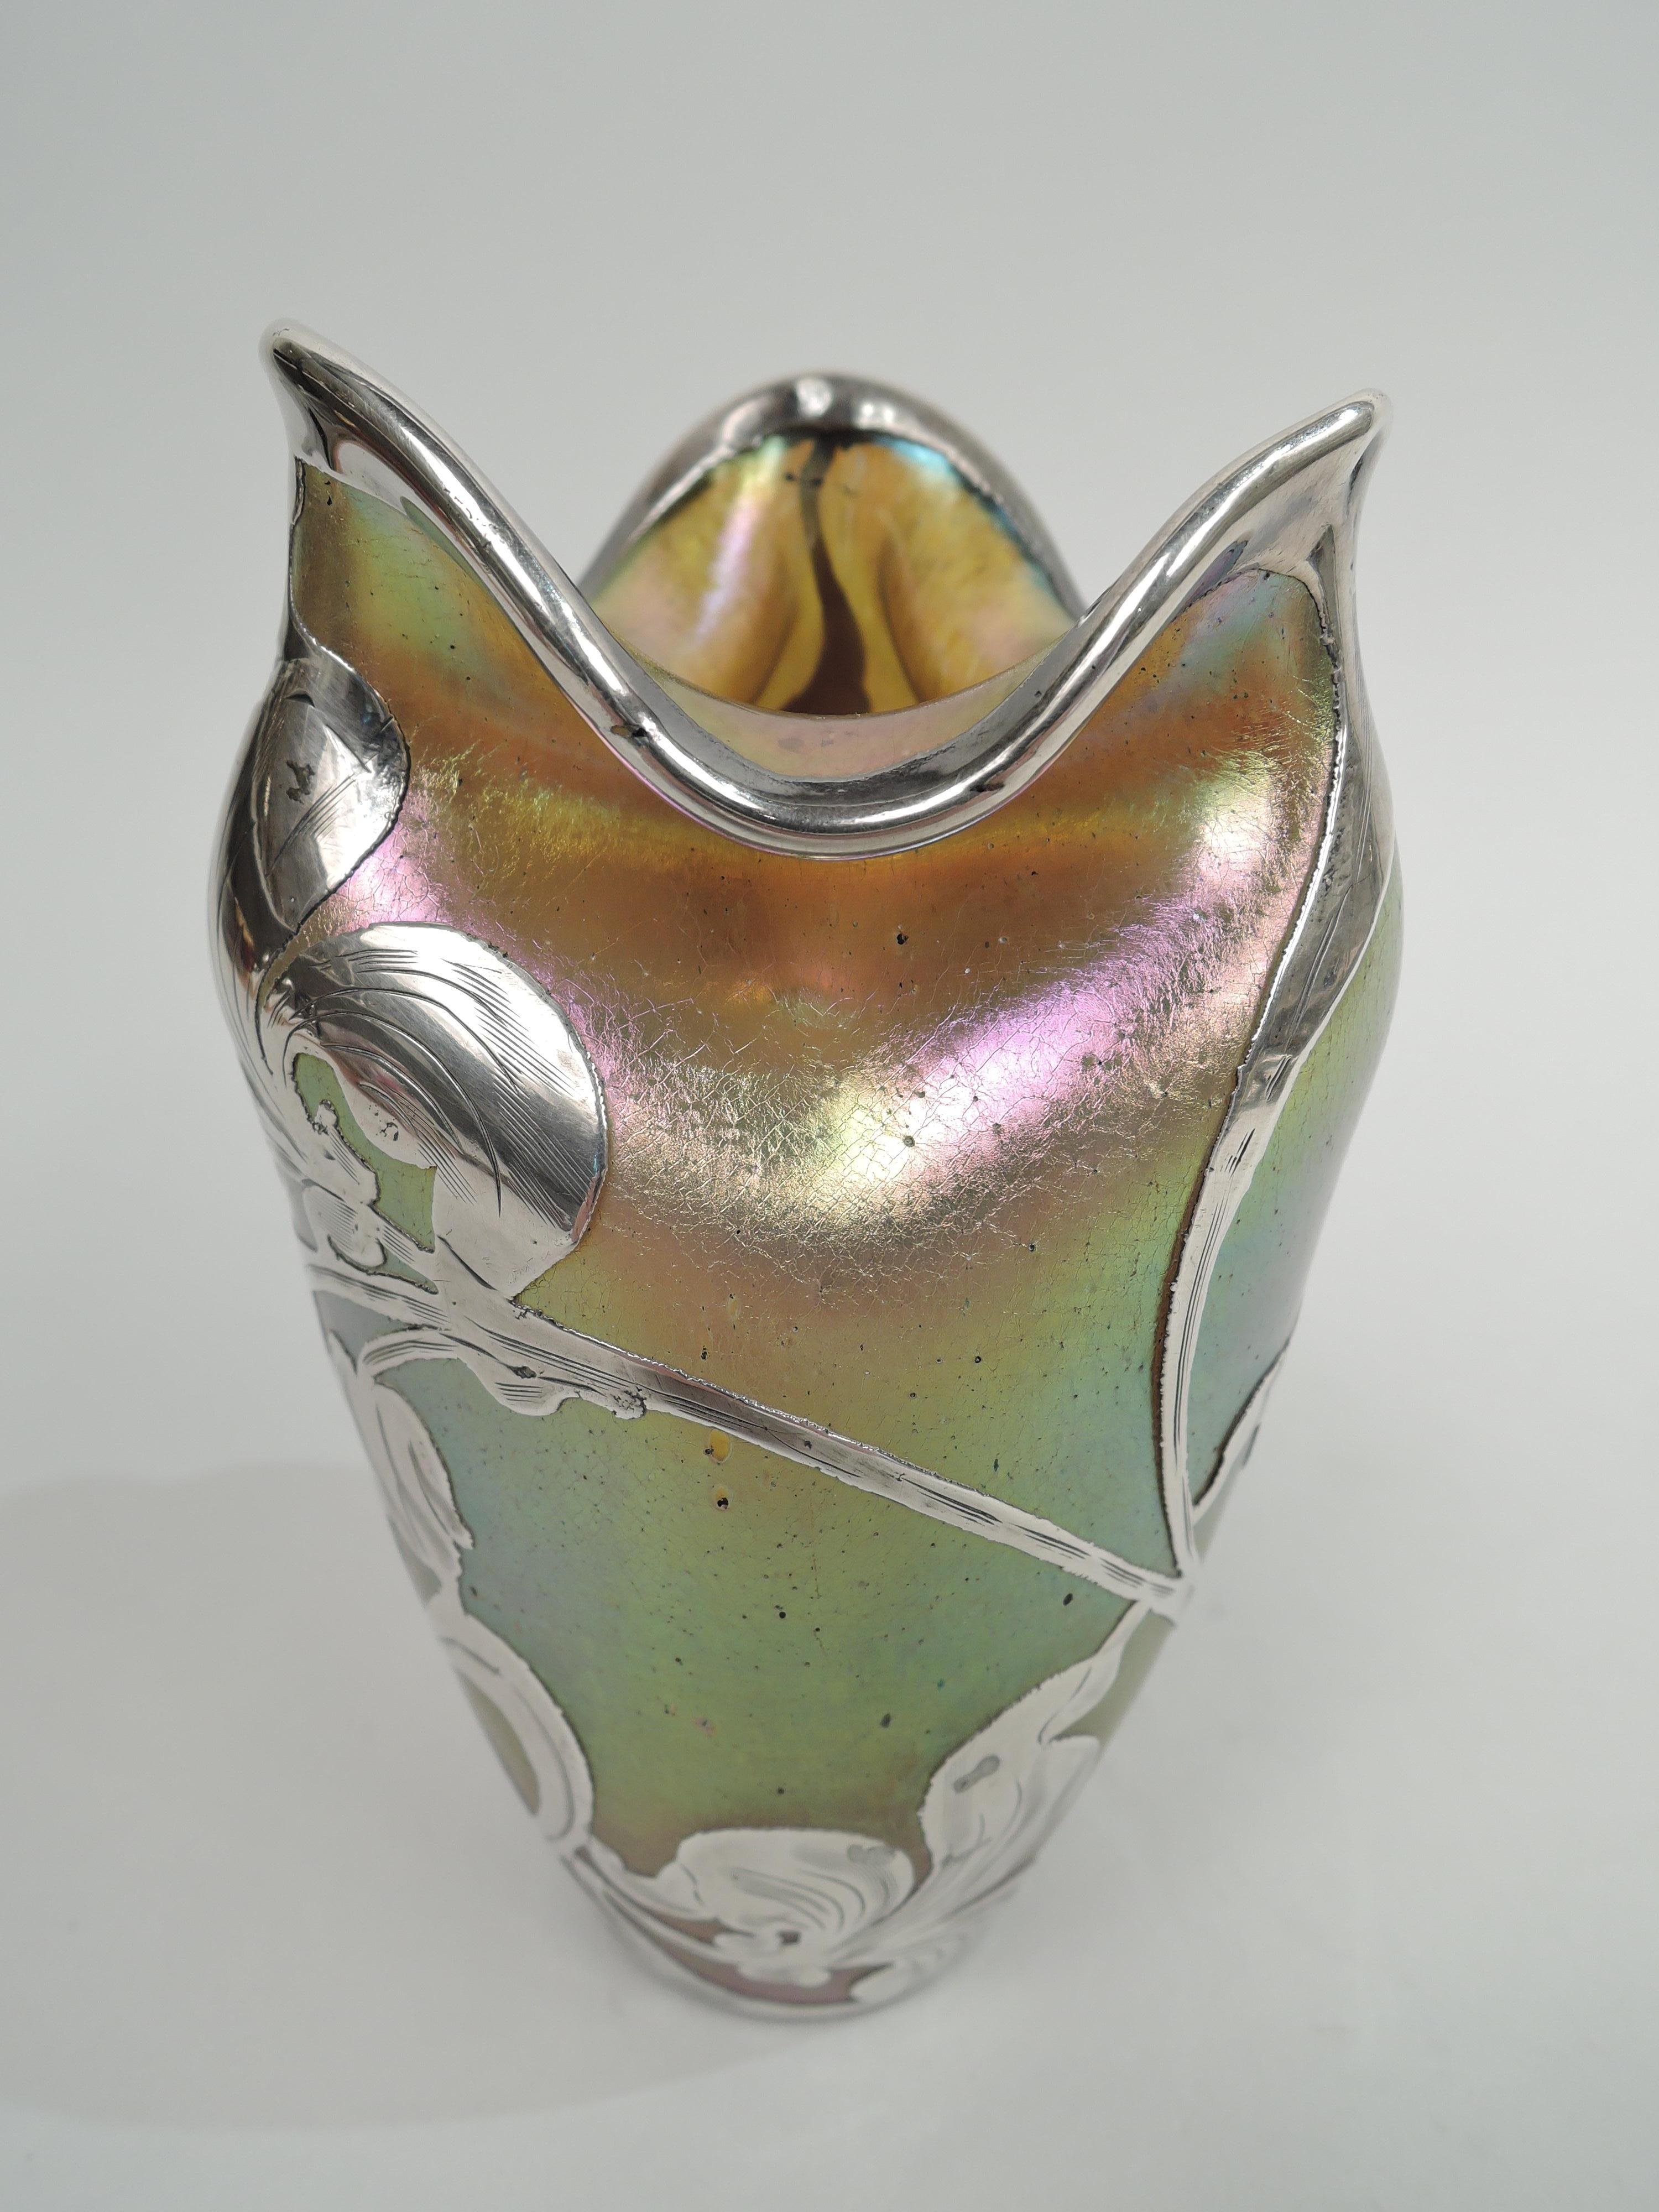 Turn-of-the-century silberiris glass vase by Loetz with engraved silver overlay. Ovoid with impressed shoulder and molten-style irregular turned-down rim. Overlay in form of whiplash tendrils and loose and fluid blooms. Glass iridescent in purple,